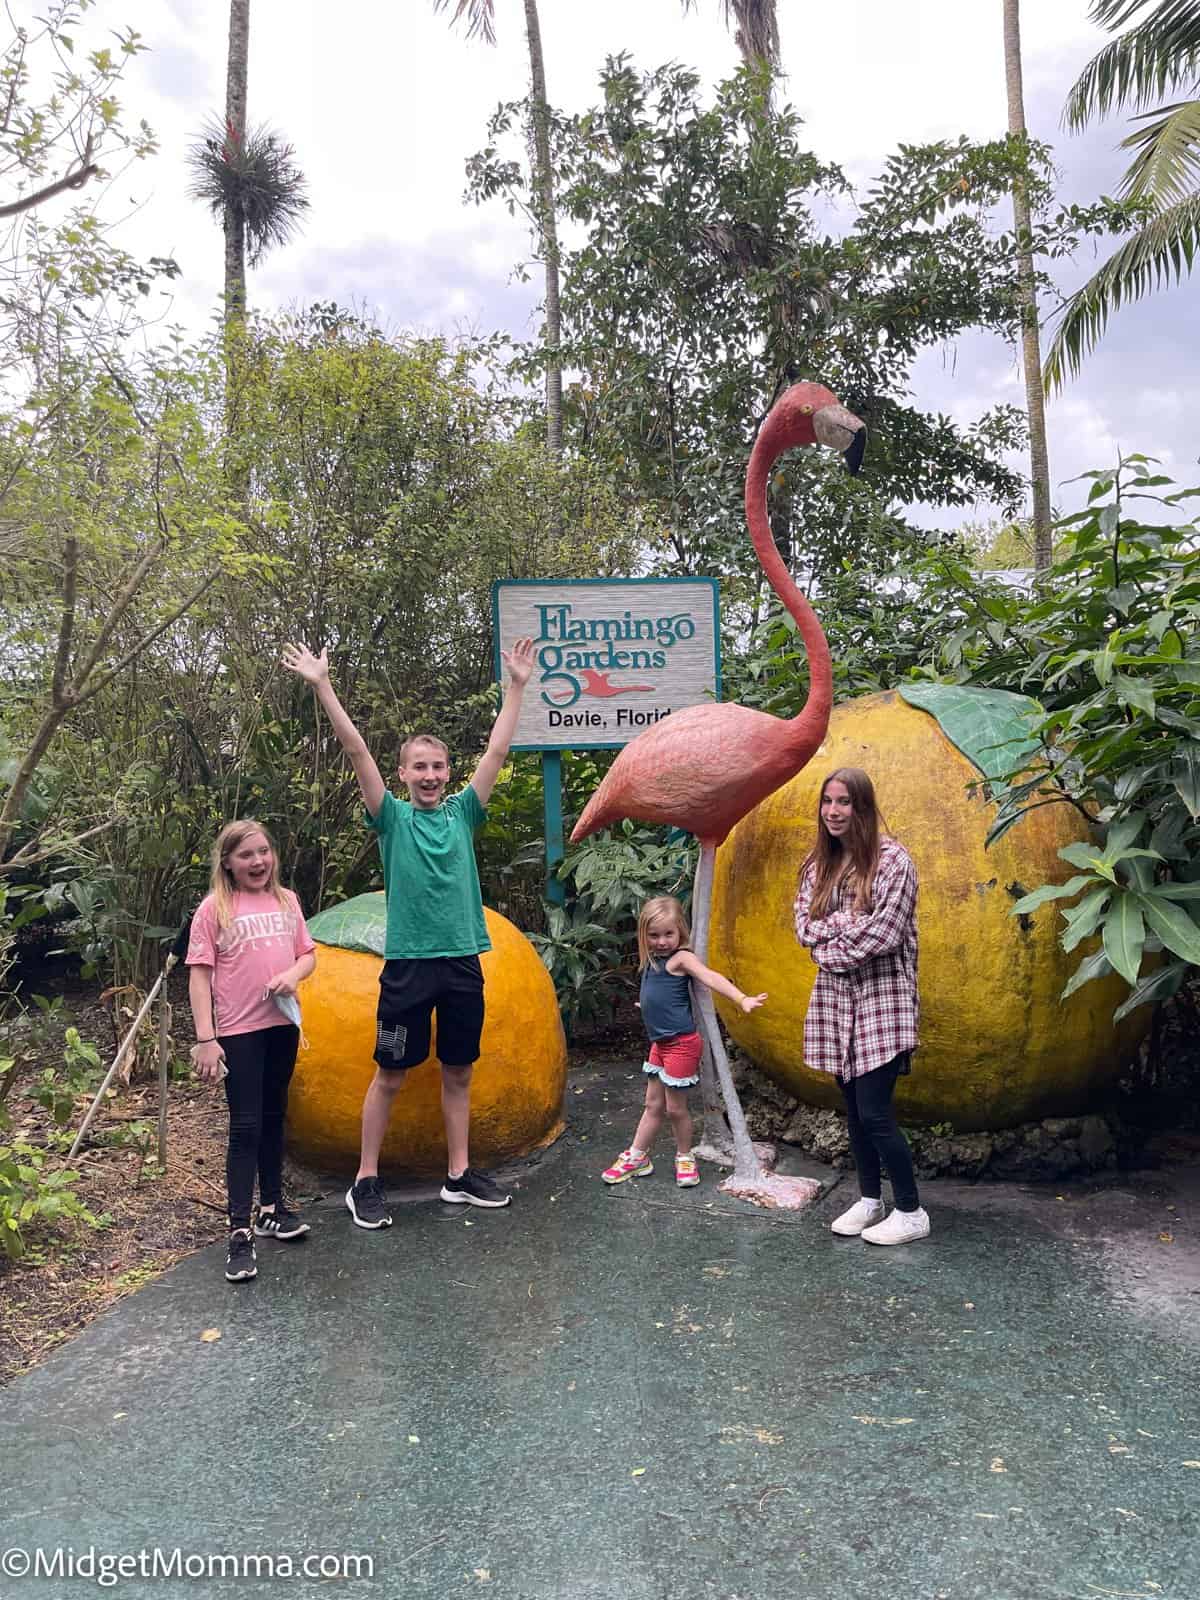 things to do with kids in fort lauderdale florida - Flamingo Gardens